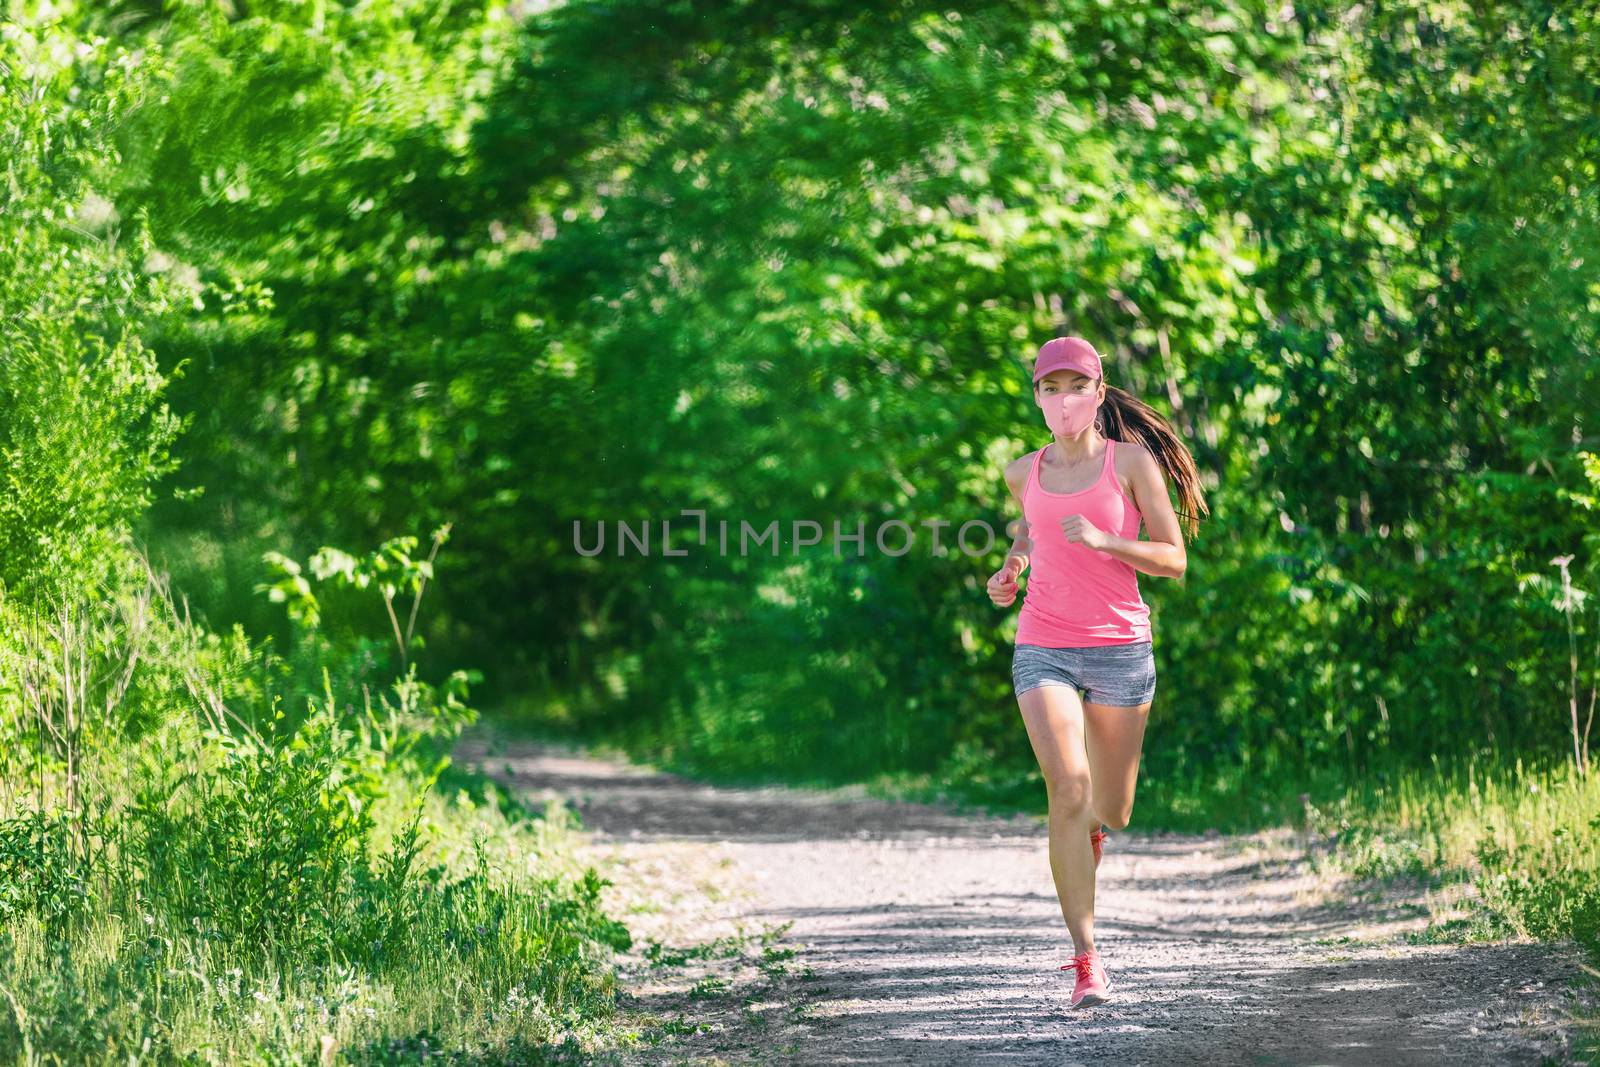 Mask corona virus COVID-19 running runner athlete wearing mask jogging outside on run workout in summer park nature. Sport lifestyle asian young woman by Maridav